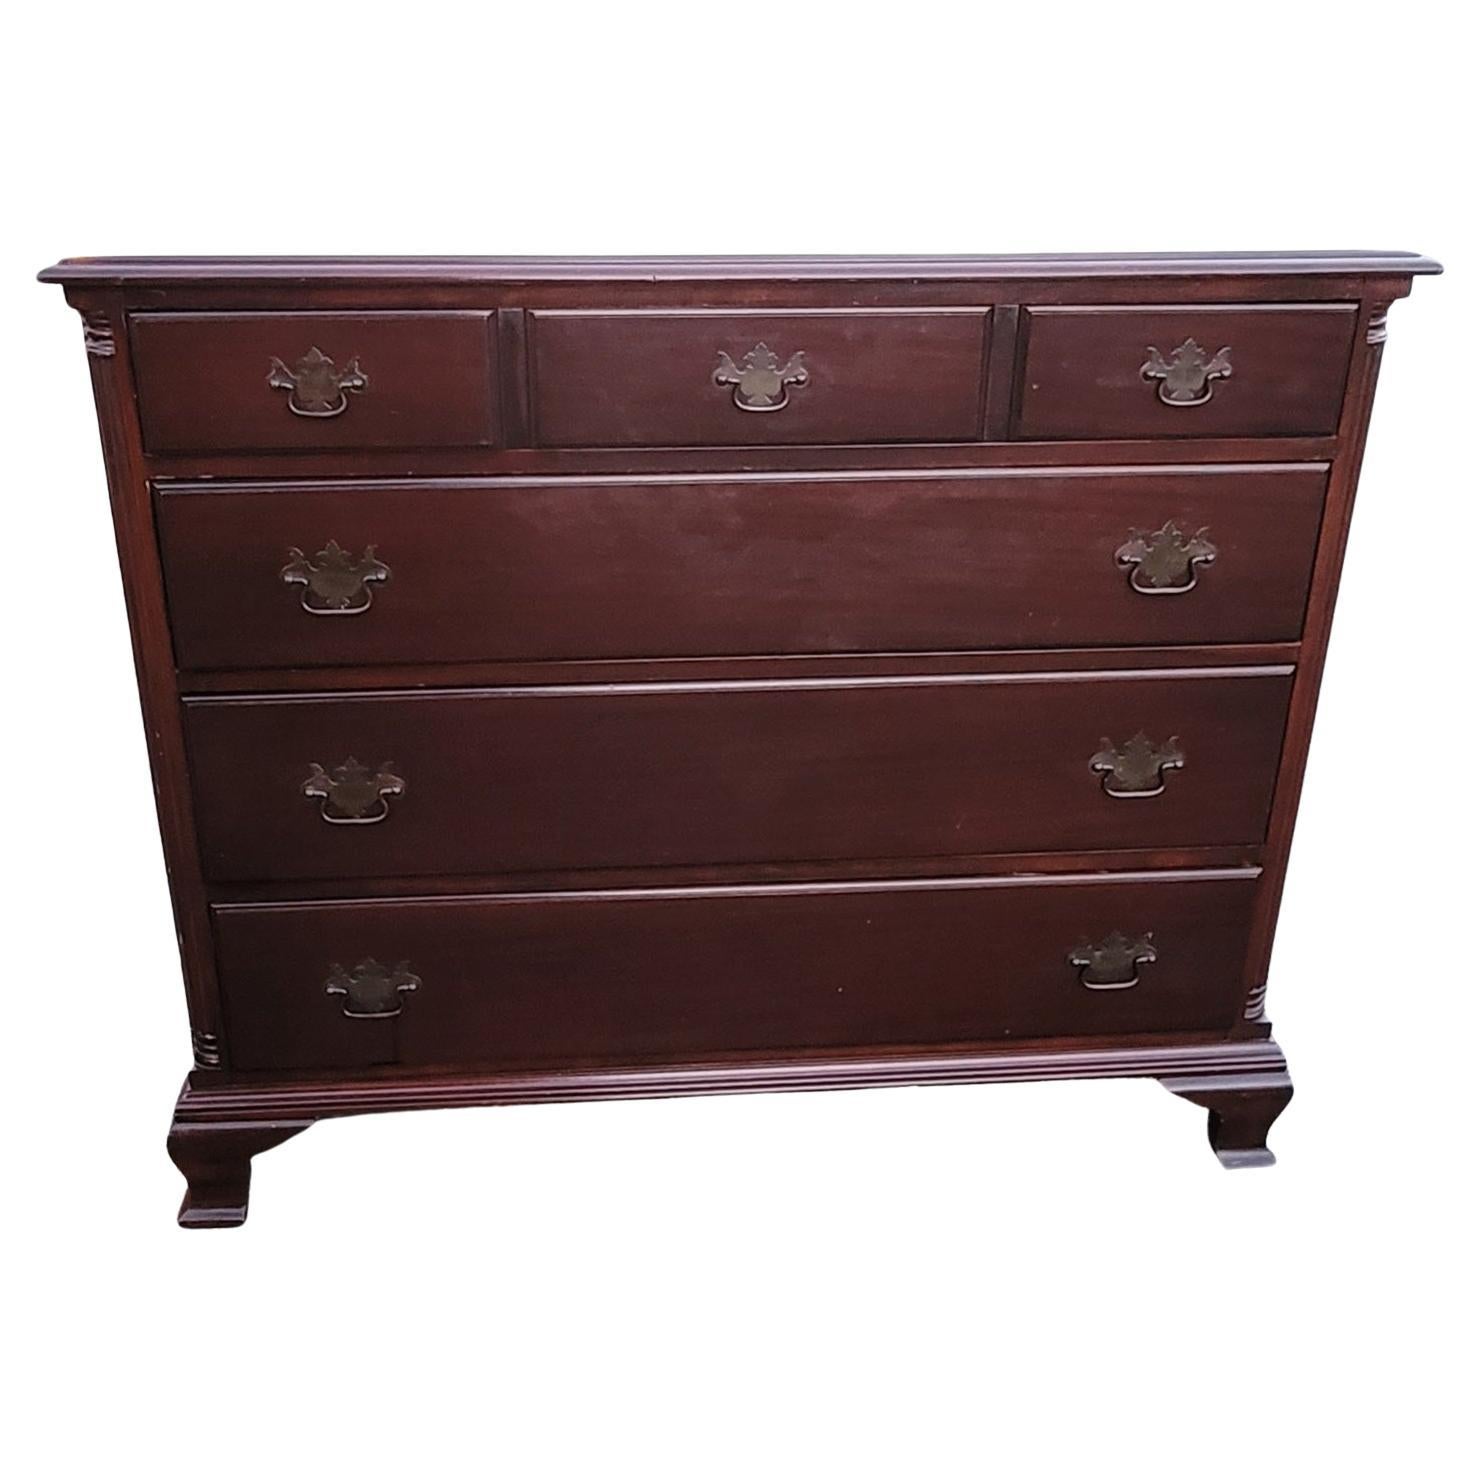 1940s English Chippendale Mahogany Commode Chest of Drawers